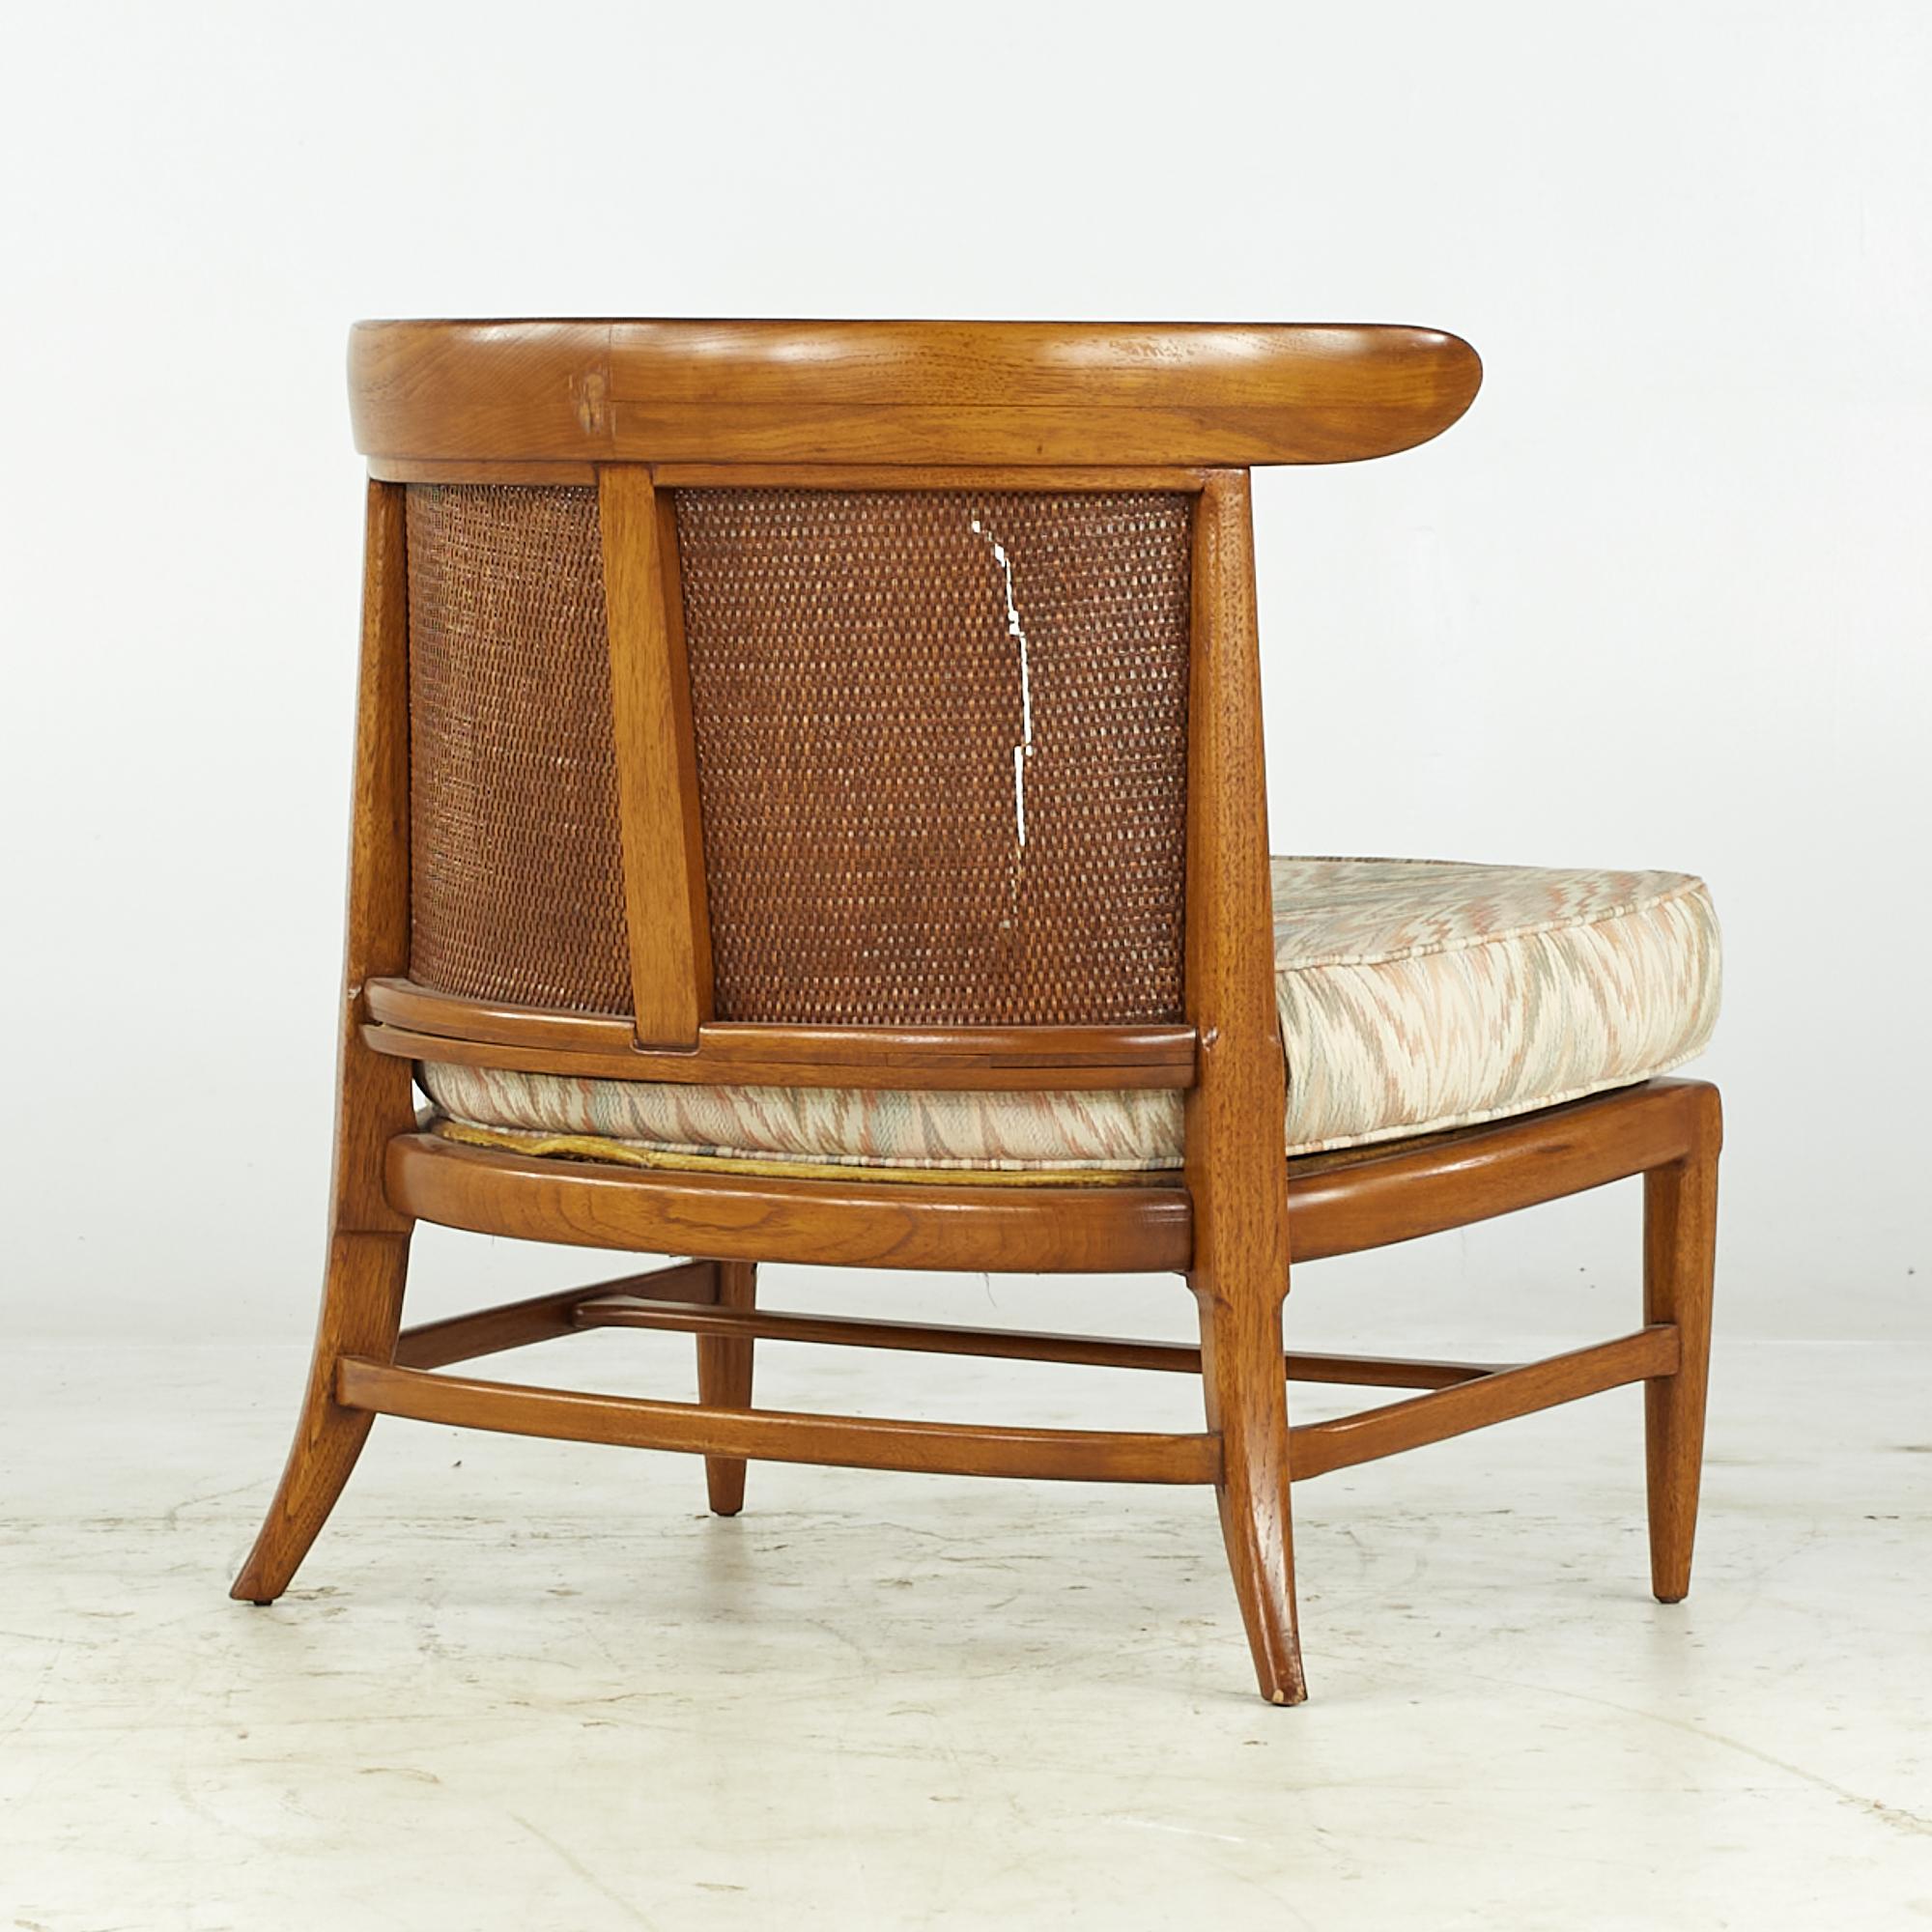 Late 20th Century John Lubberts Lambert Mulder Tomlinson MCM Cane and Walnut Slipper Chair, Pair For Sale